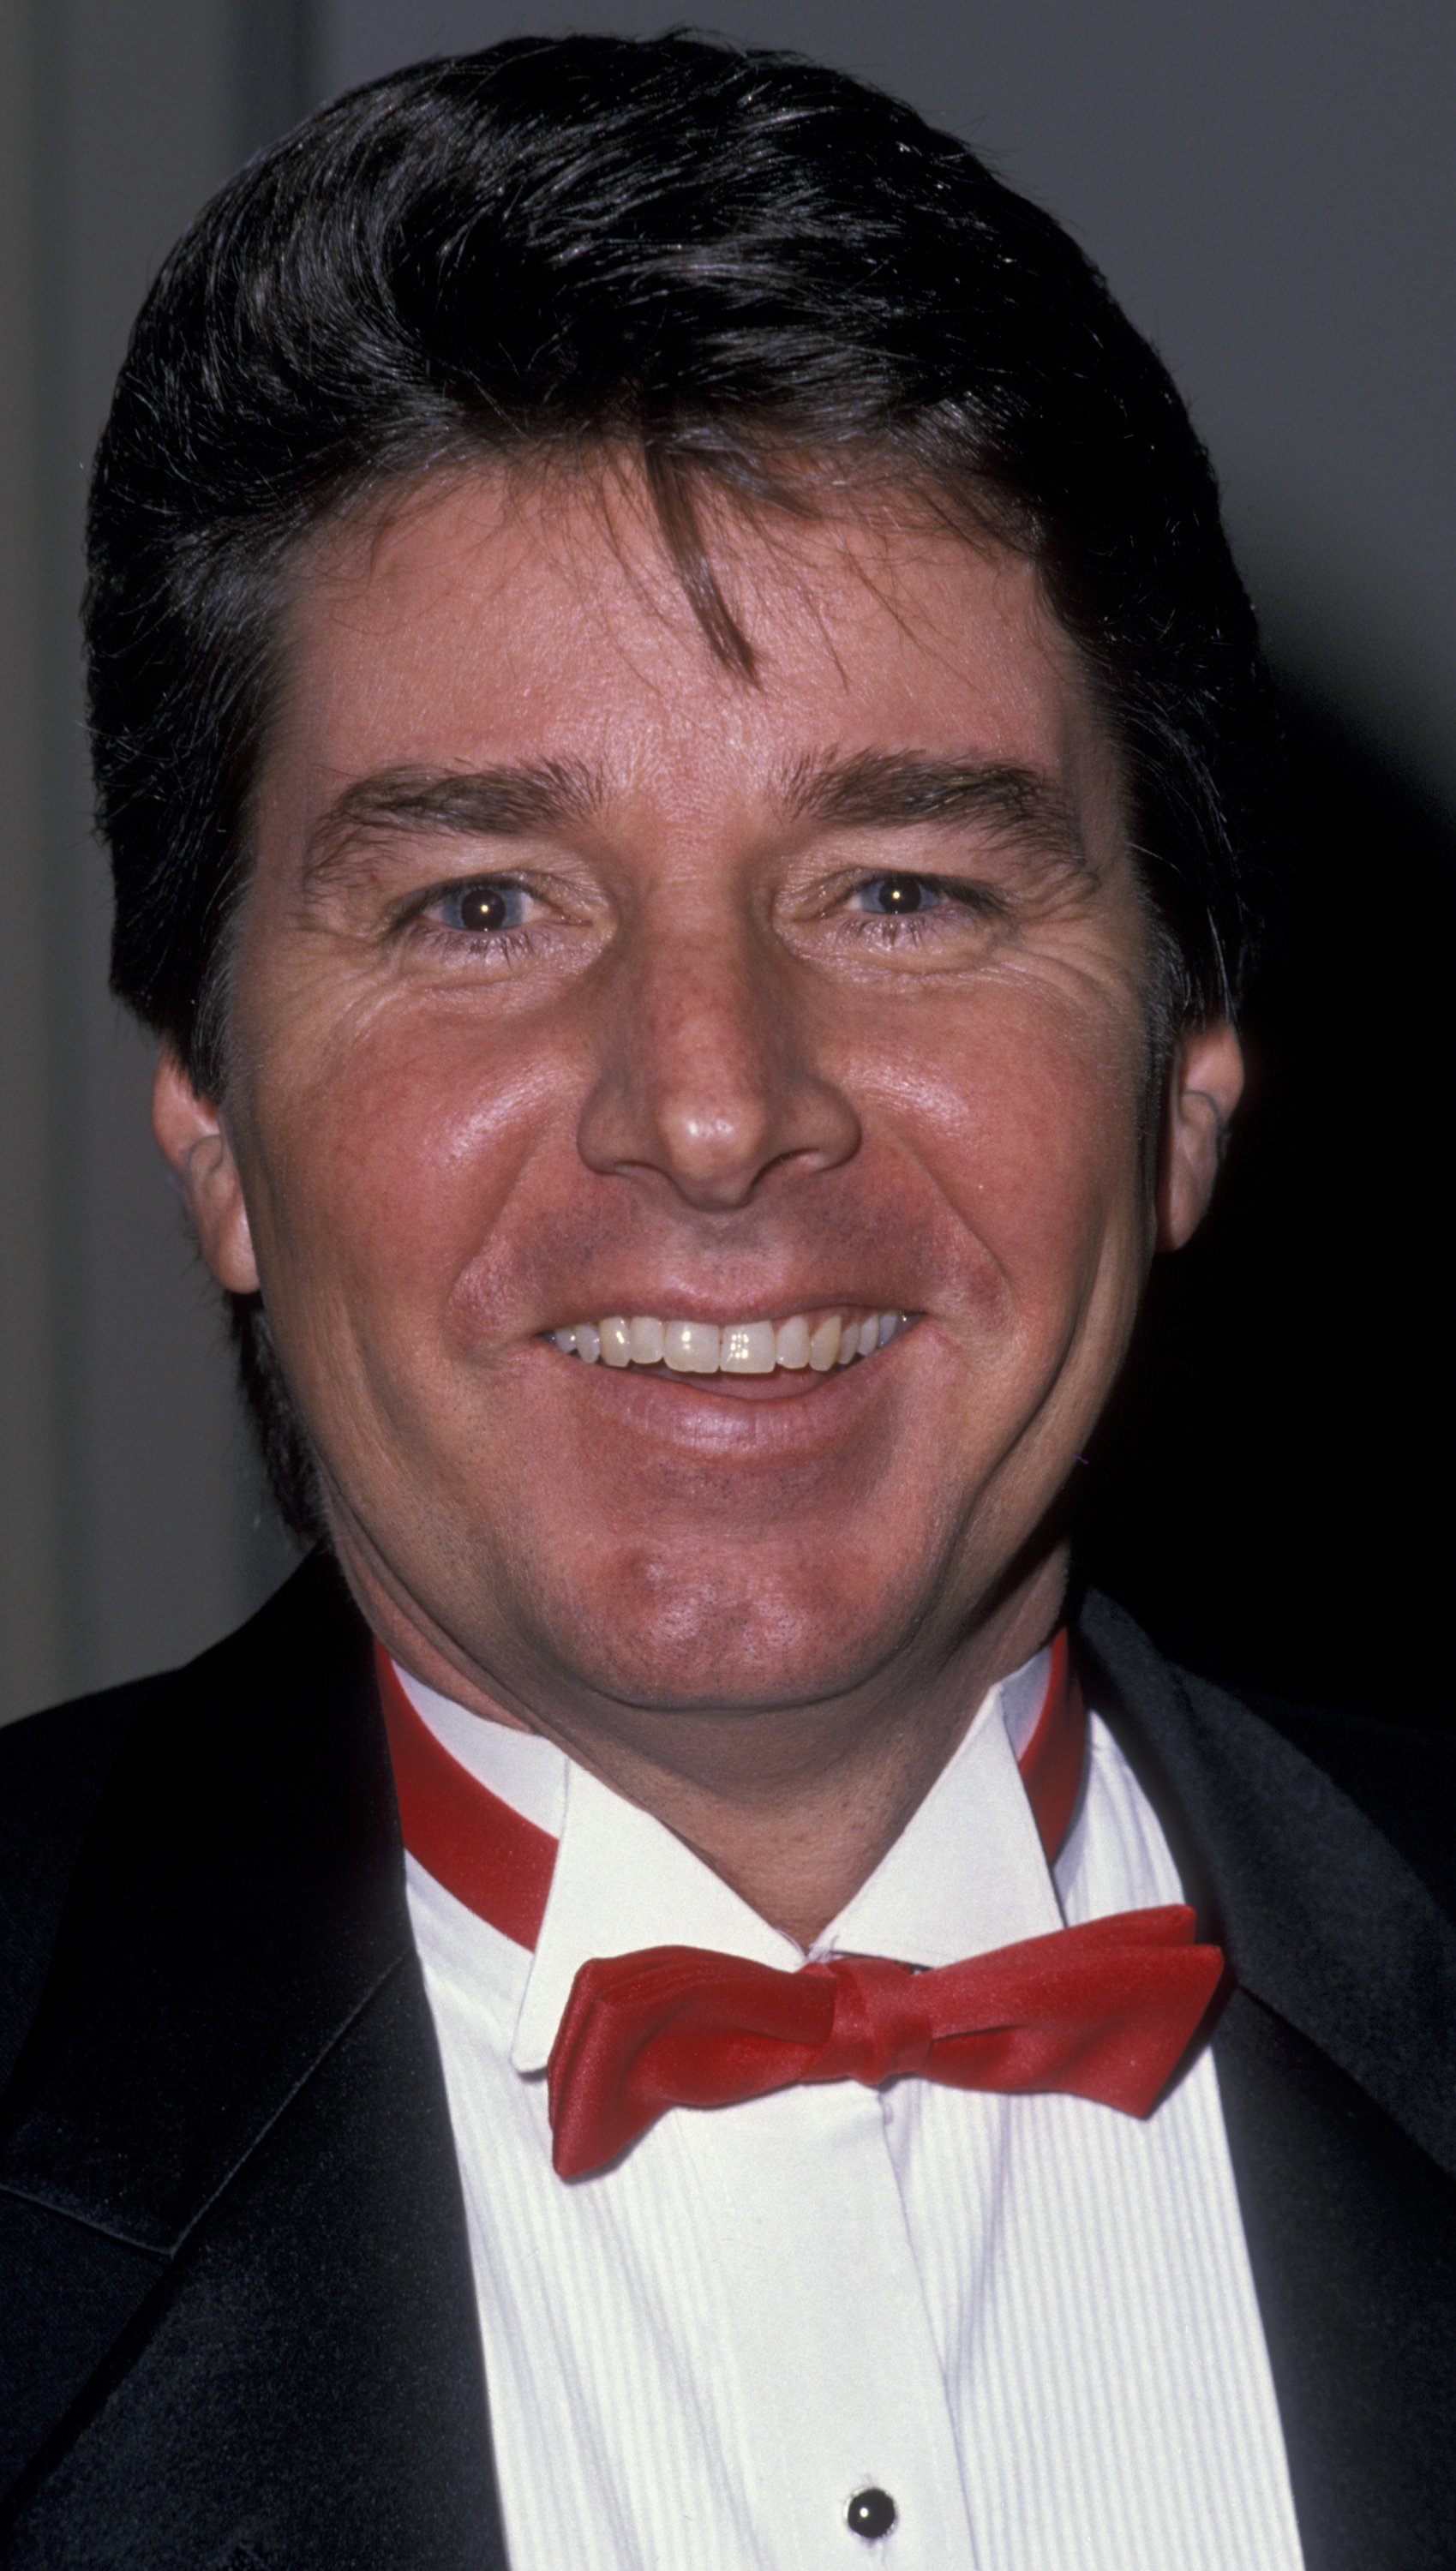 Bobby Sherman attends 100th Episode Party for "Murder, She Wrote" on February 12, 1989, at the Biltmore Hotel in Los Angeles, California. | Source: Getty Images